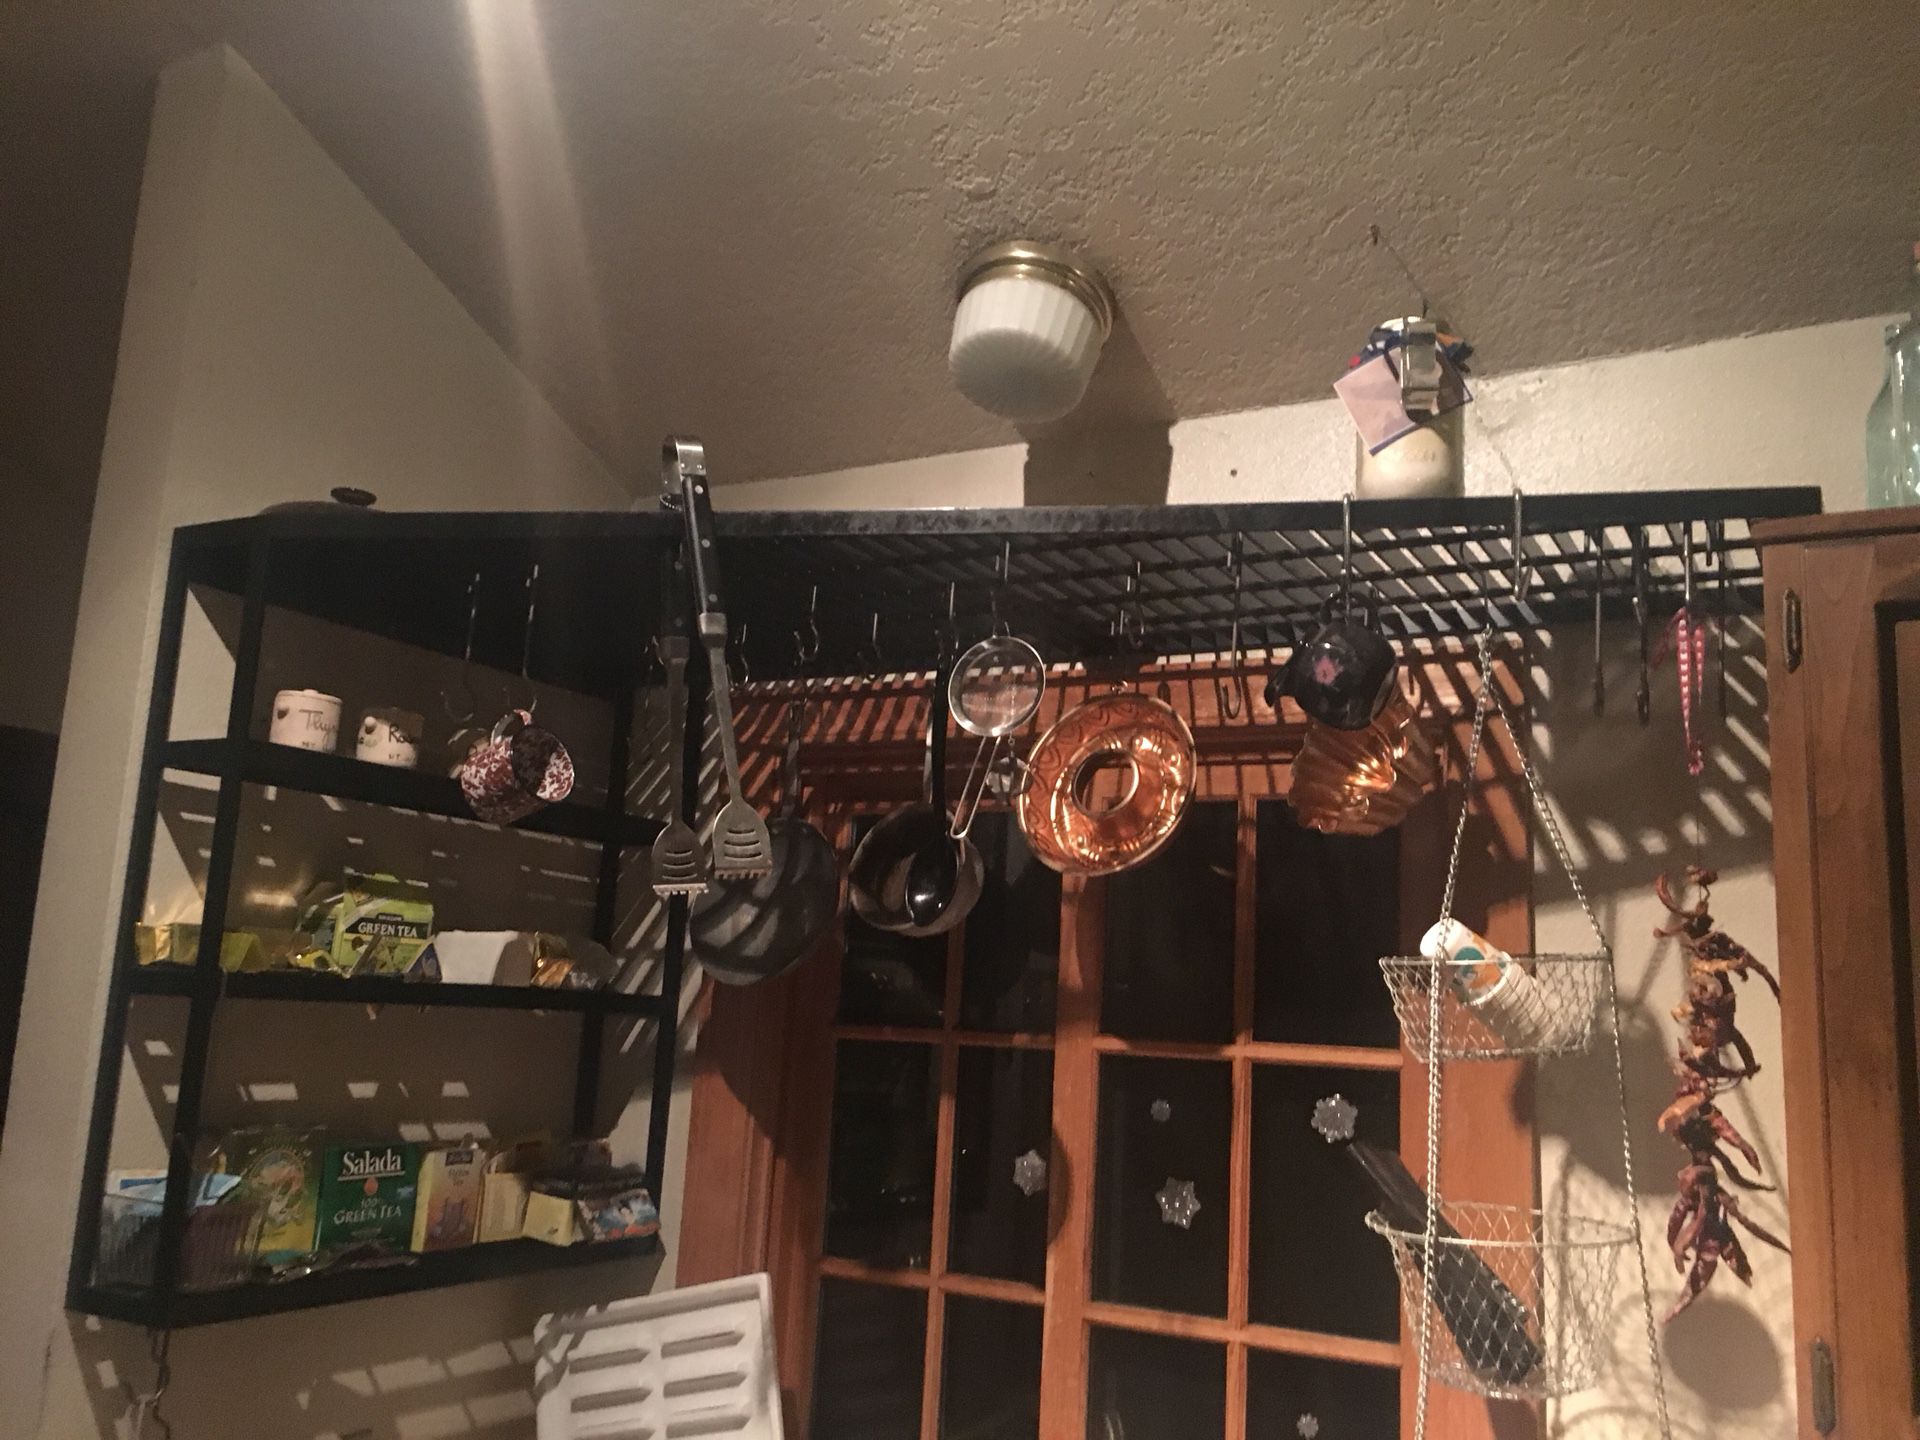 Heavy duty steel rack for hanging pots and pans